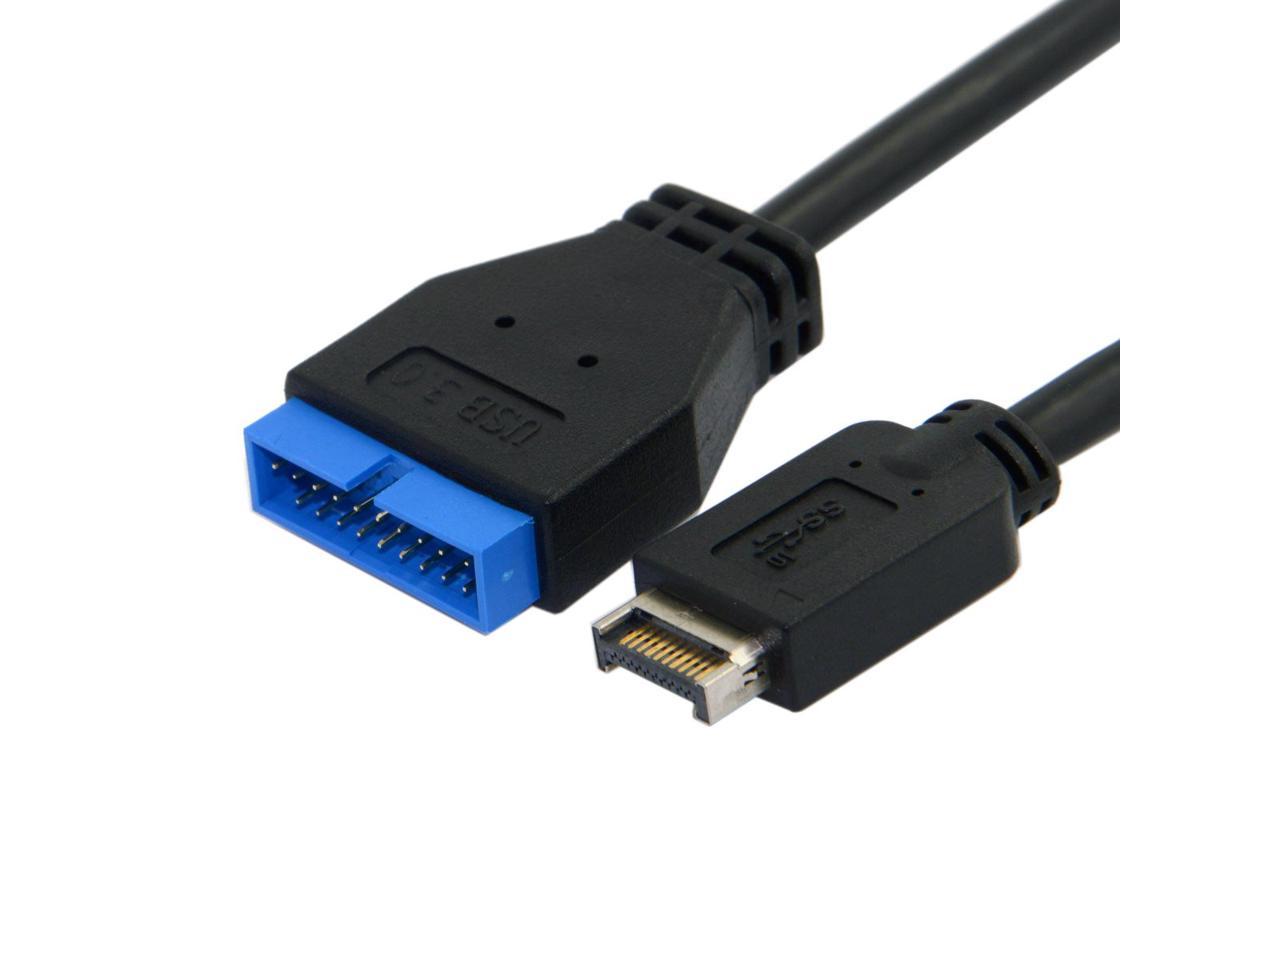 YIZAN USB 3.1 Front Panel Header to USB 3.0 20Pin Header Extension Cable for Motherboard 20cm 